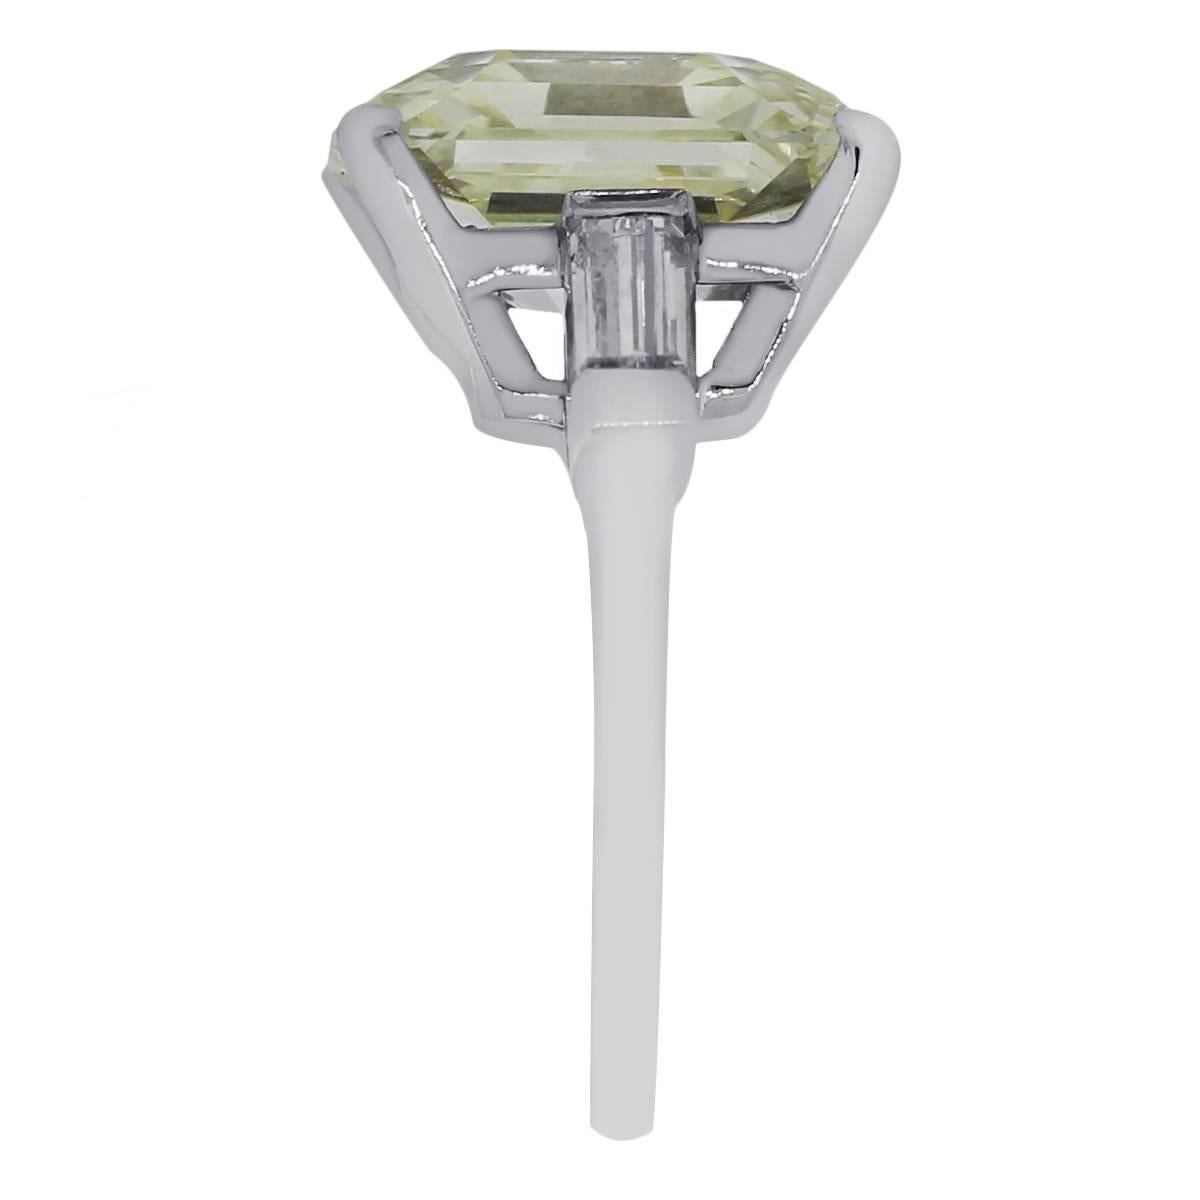 Material: Platinum
Style: GIA certified diamond engagement ring
Center Diamond Details: 7.59ct emerald cut diamond GIA certified (5182014685)
Diamond Details: Approximately 0.40ctw accent baguette cut diamonds. Diamonds are G in color and VVS in